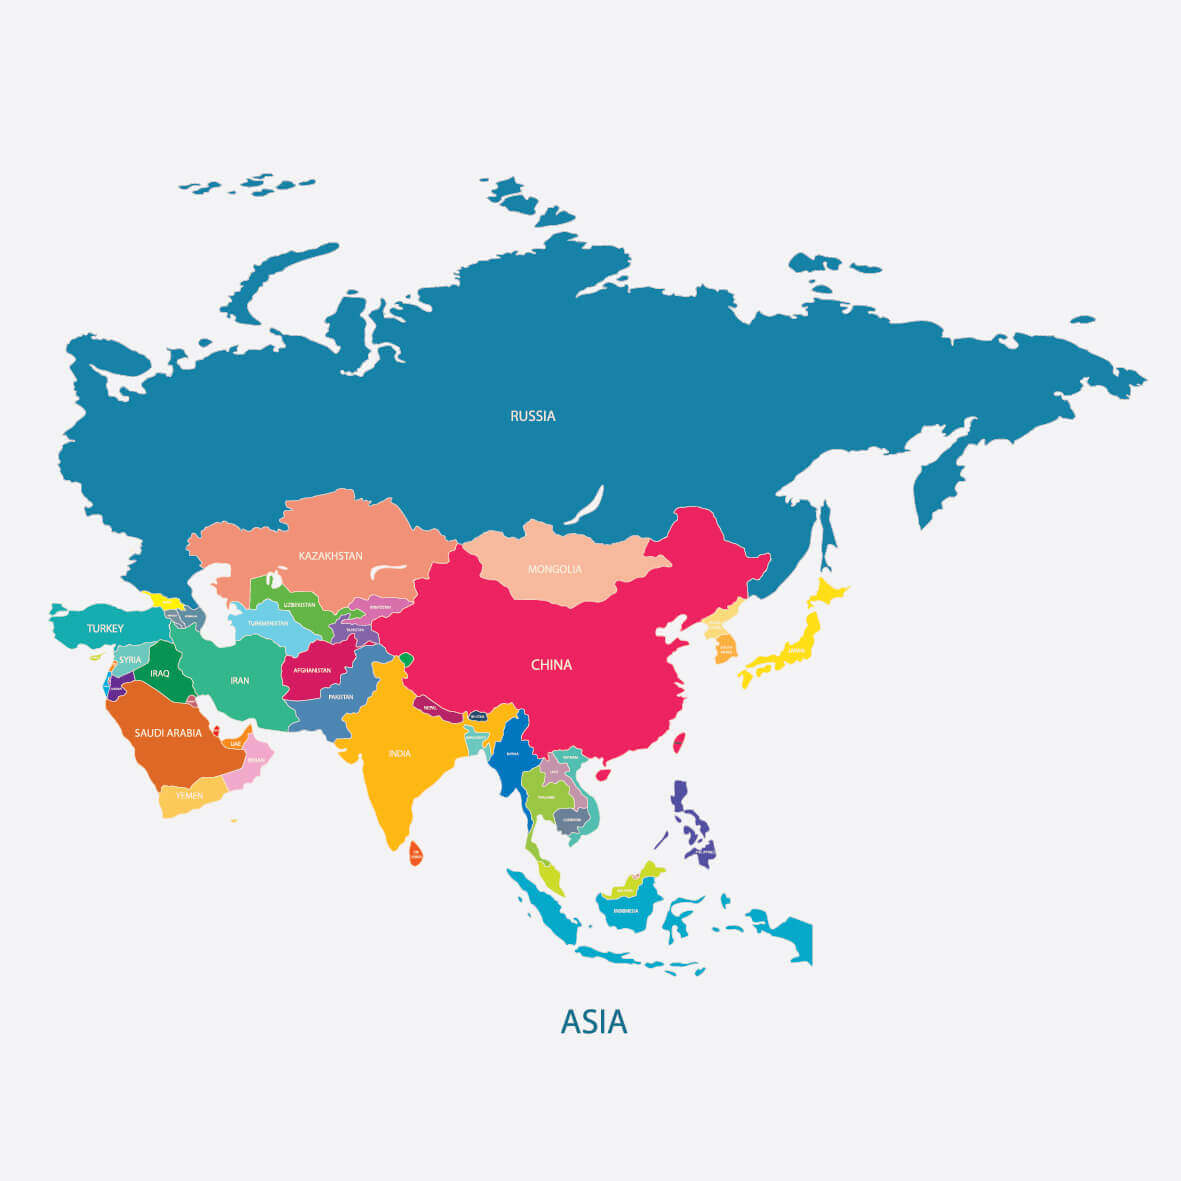 Asia Map with the Name of the World Countries